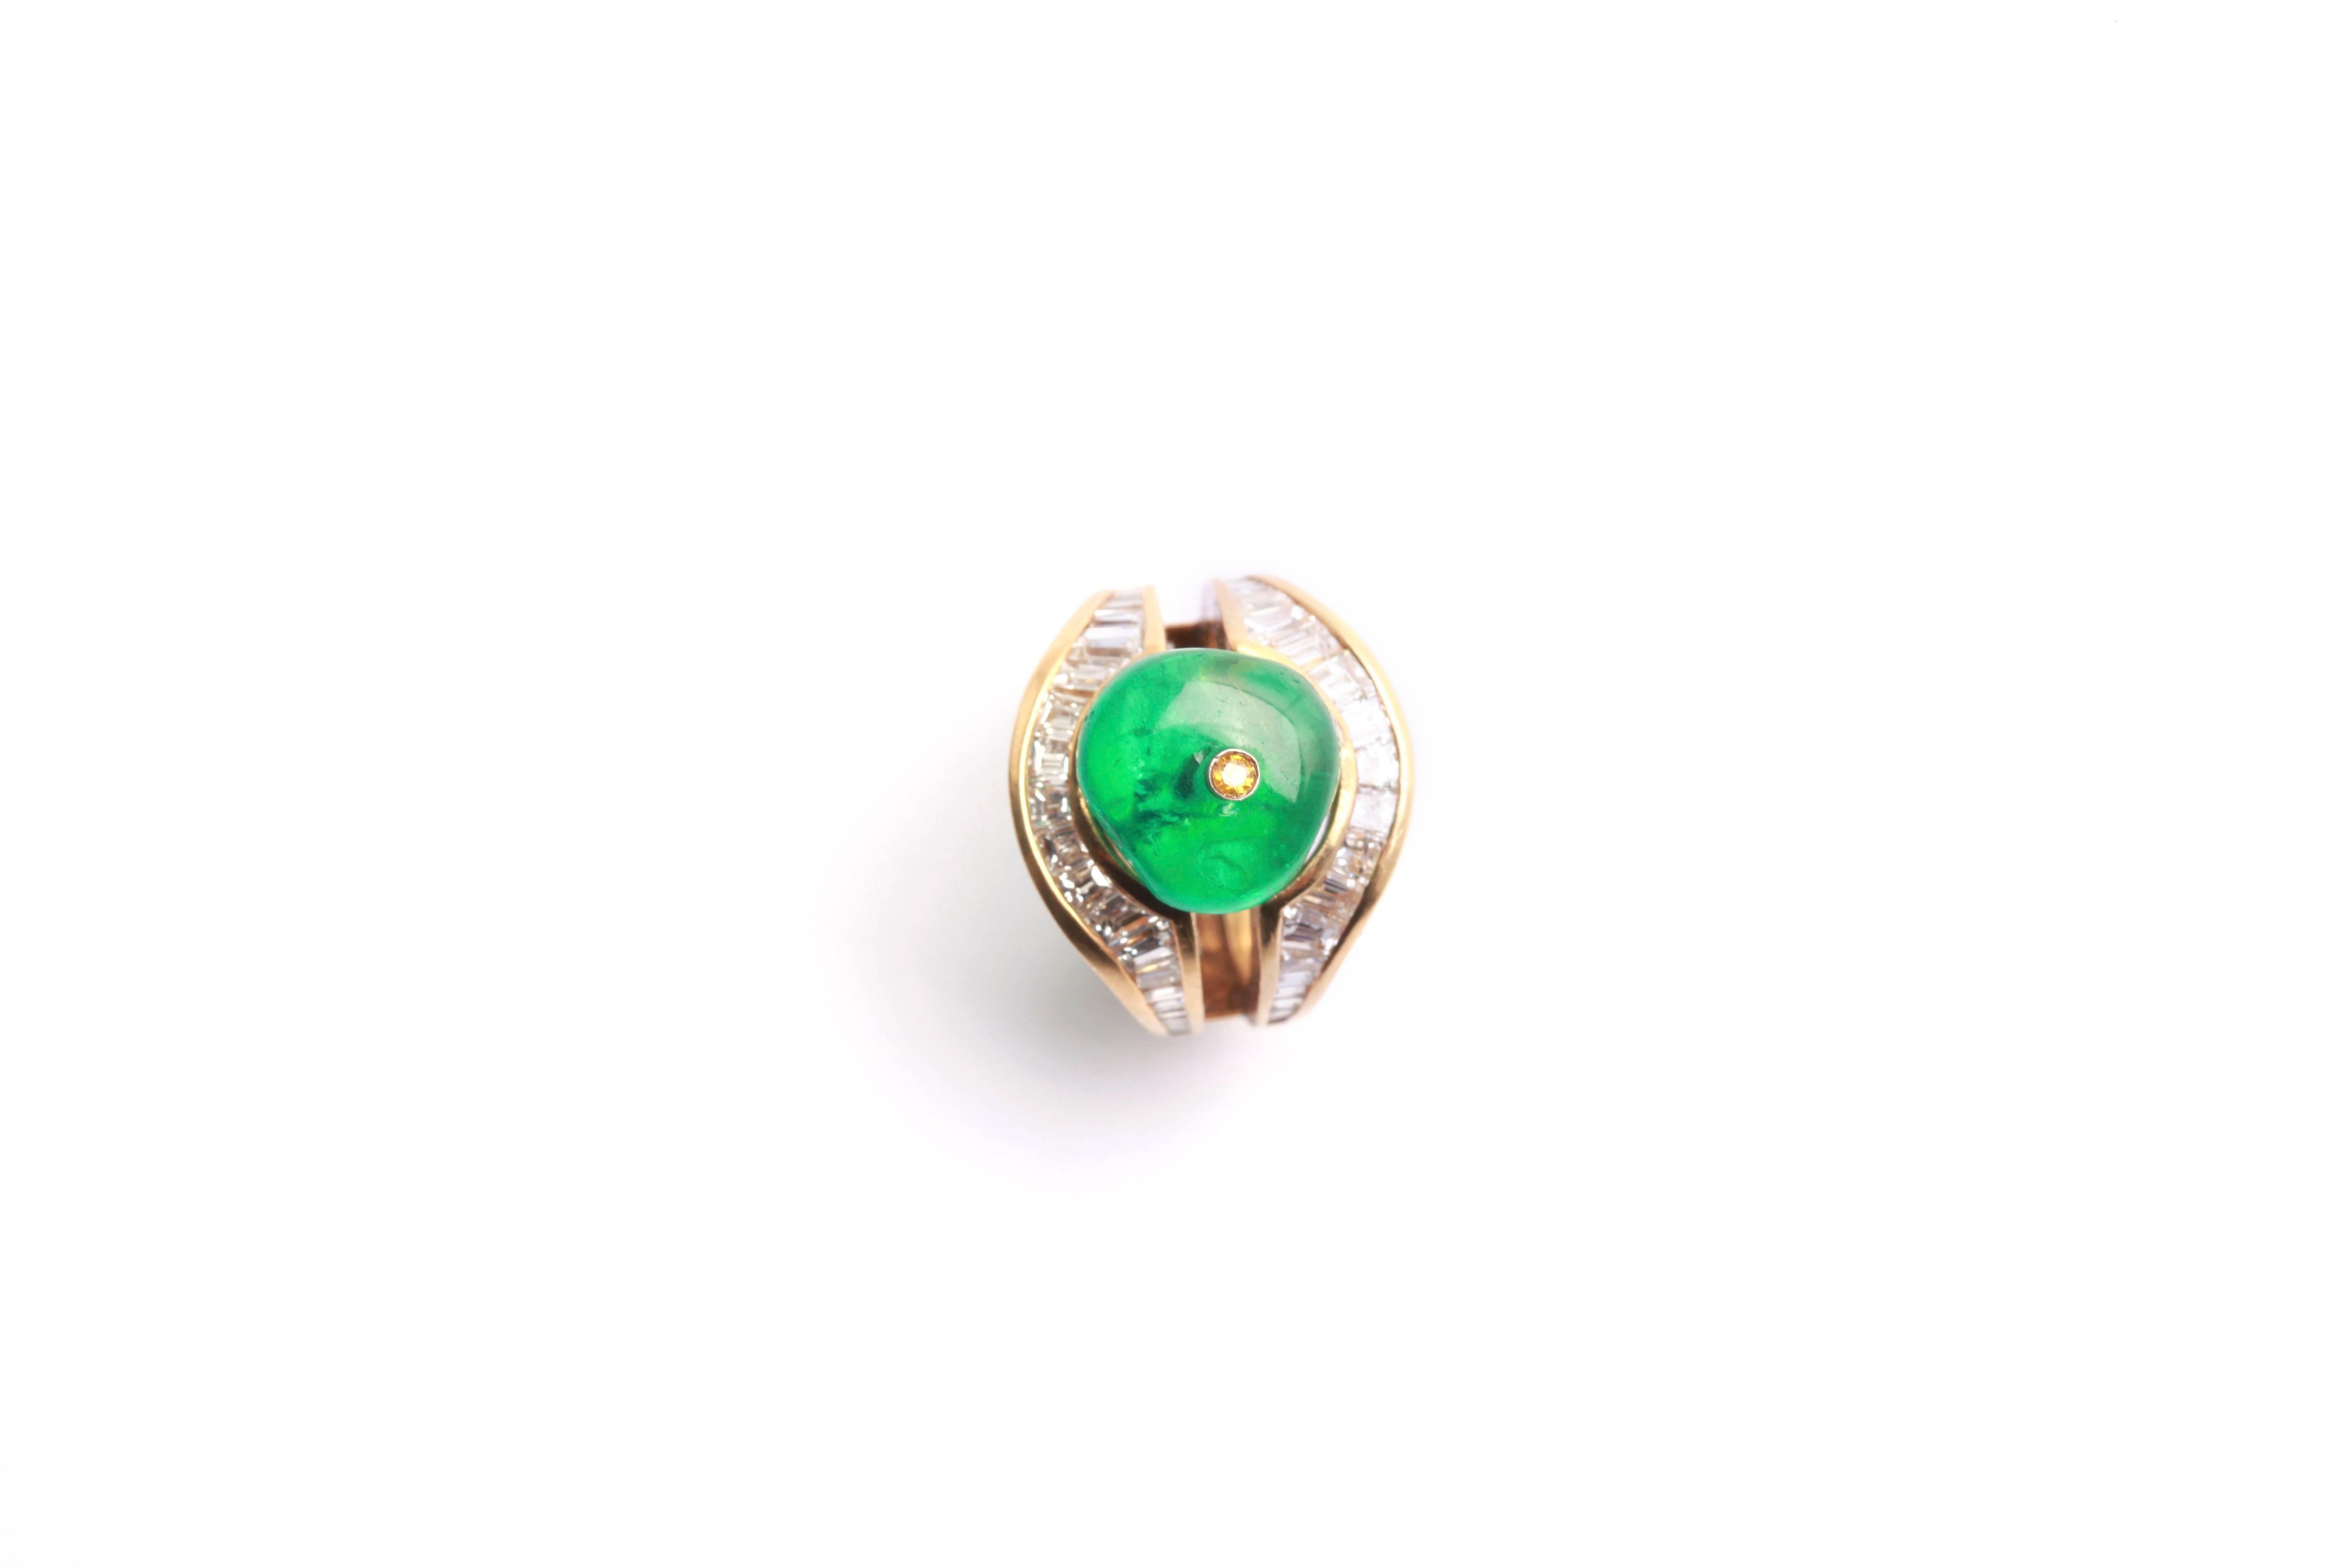 A peculiar cocktail ring in 18kt yellow gold, highlighted with baguette cut diamonds (apprx 3cts total), showcasing a fine Old Mine Colombian emerald bead weighing 9.03 carats. Circa 1970
